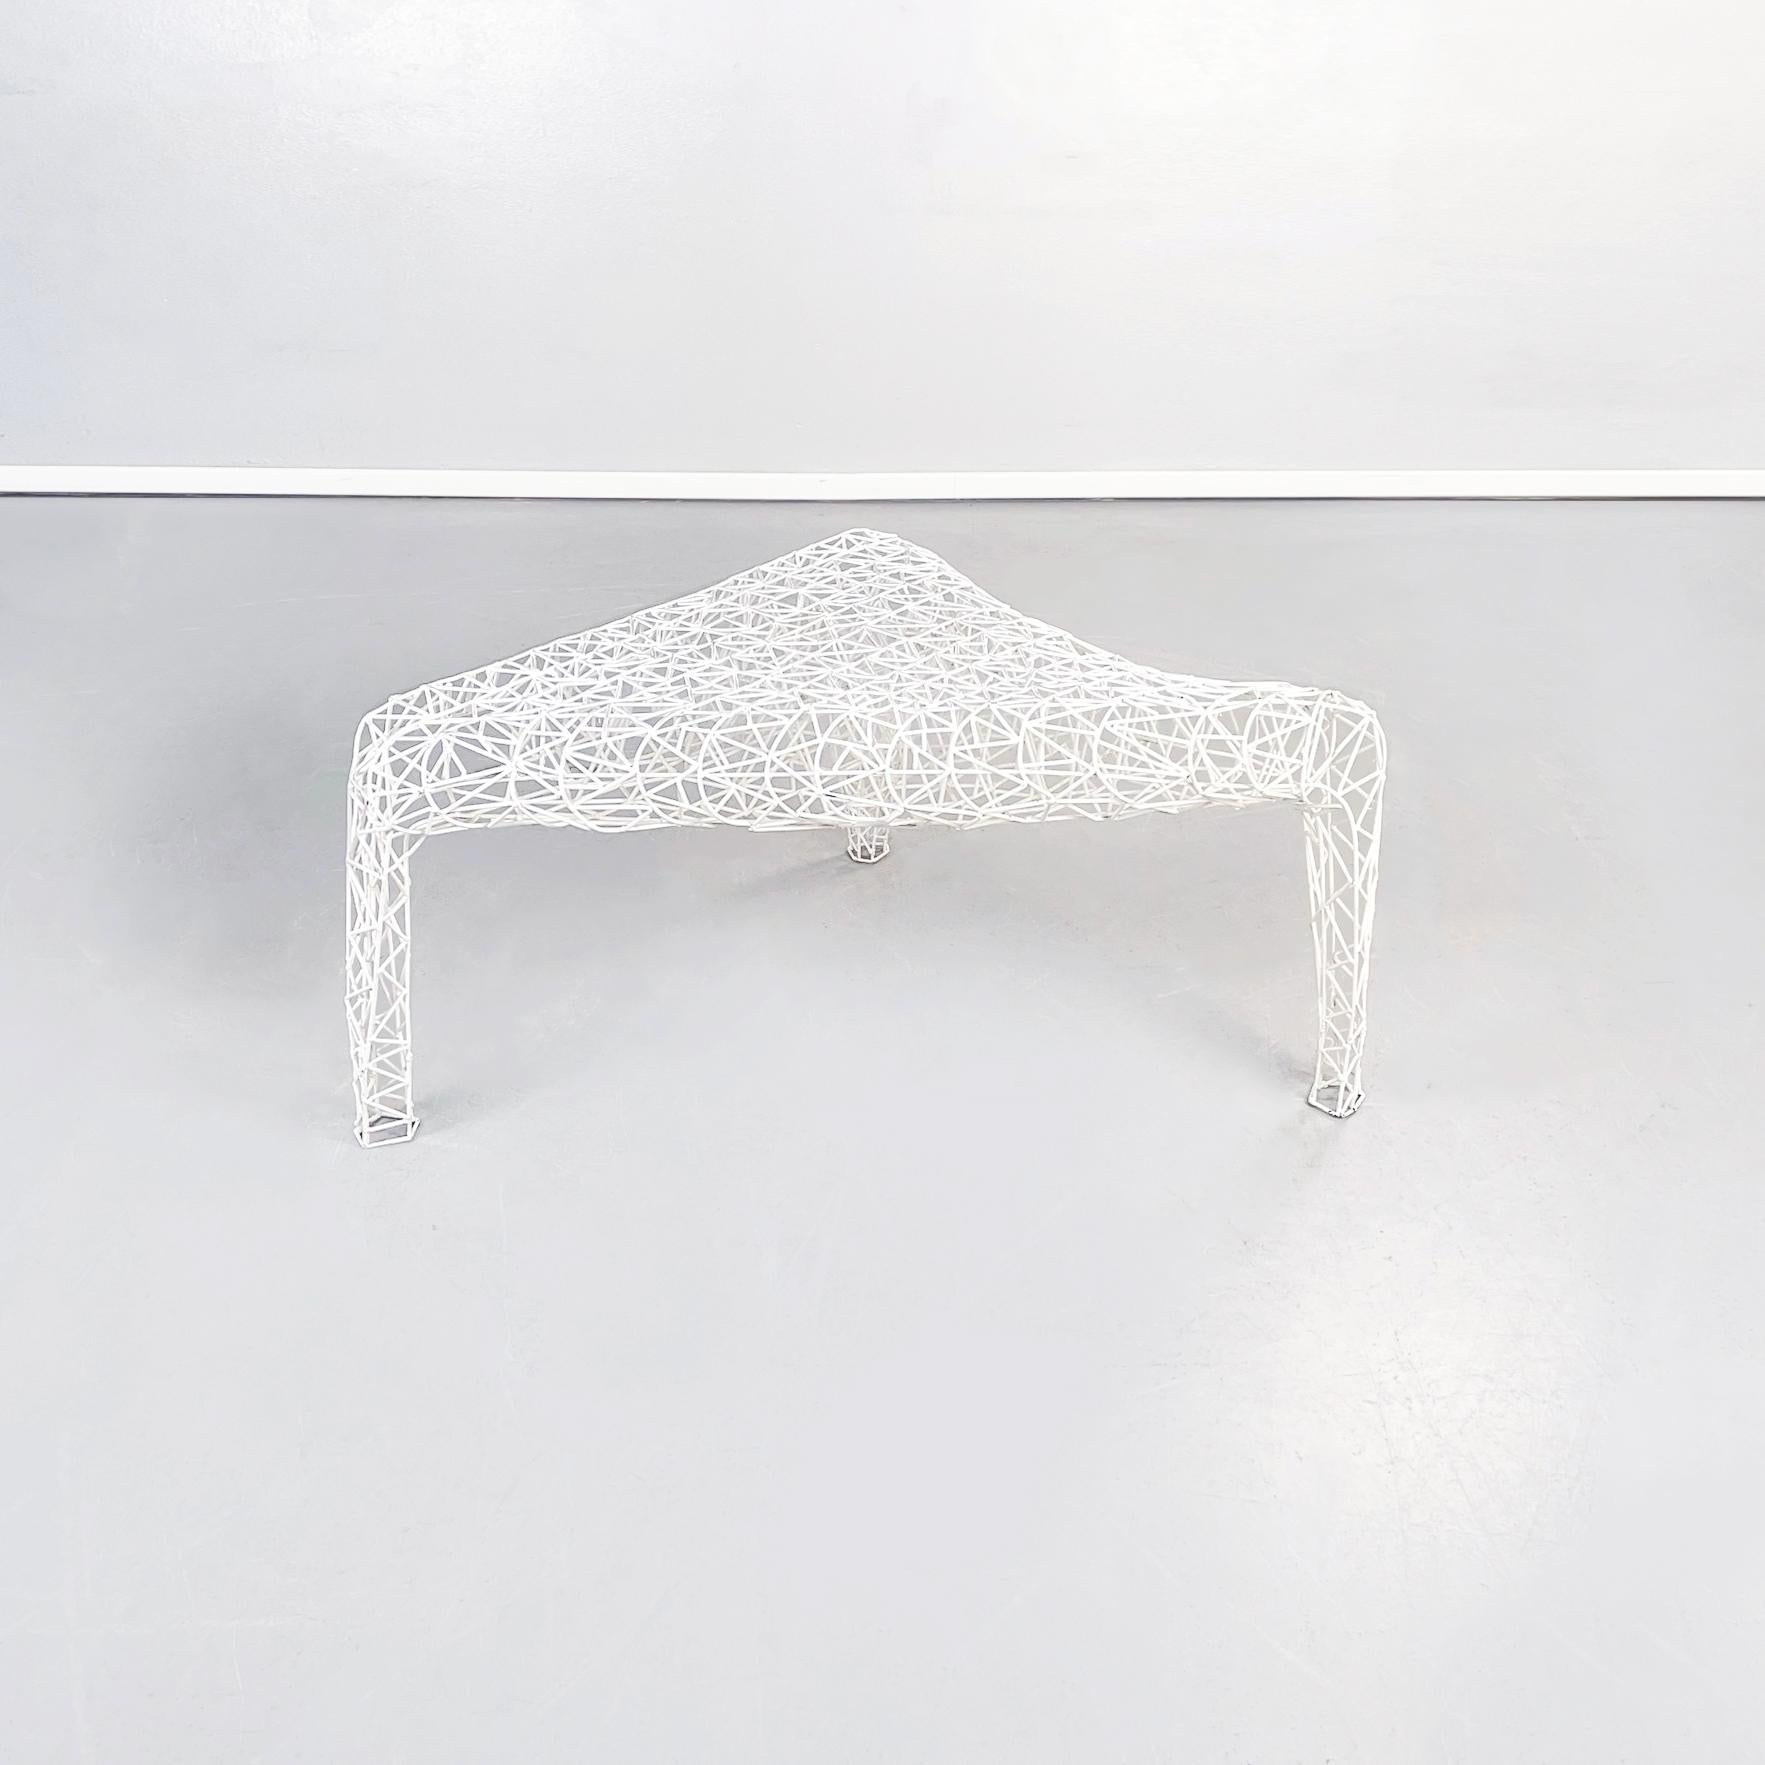 Italian post-modern Outside coffee table in white tubular metal, 2000s
Coffee table of irregularly shaped in white painted metal. The entire table is made up of a dense weave of thin metal tubes. The top can be traced back to the shape of the